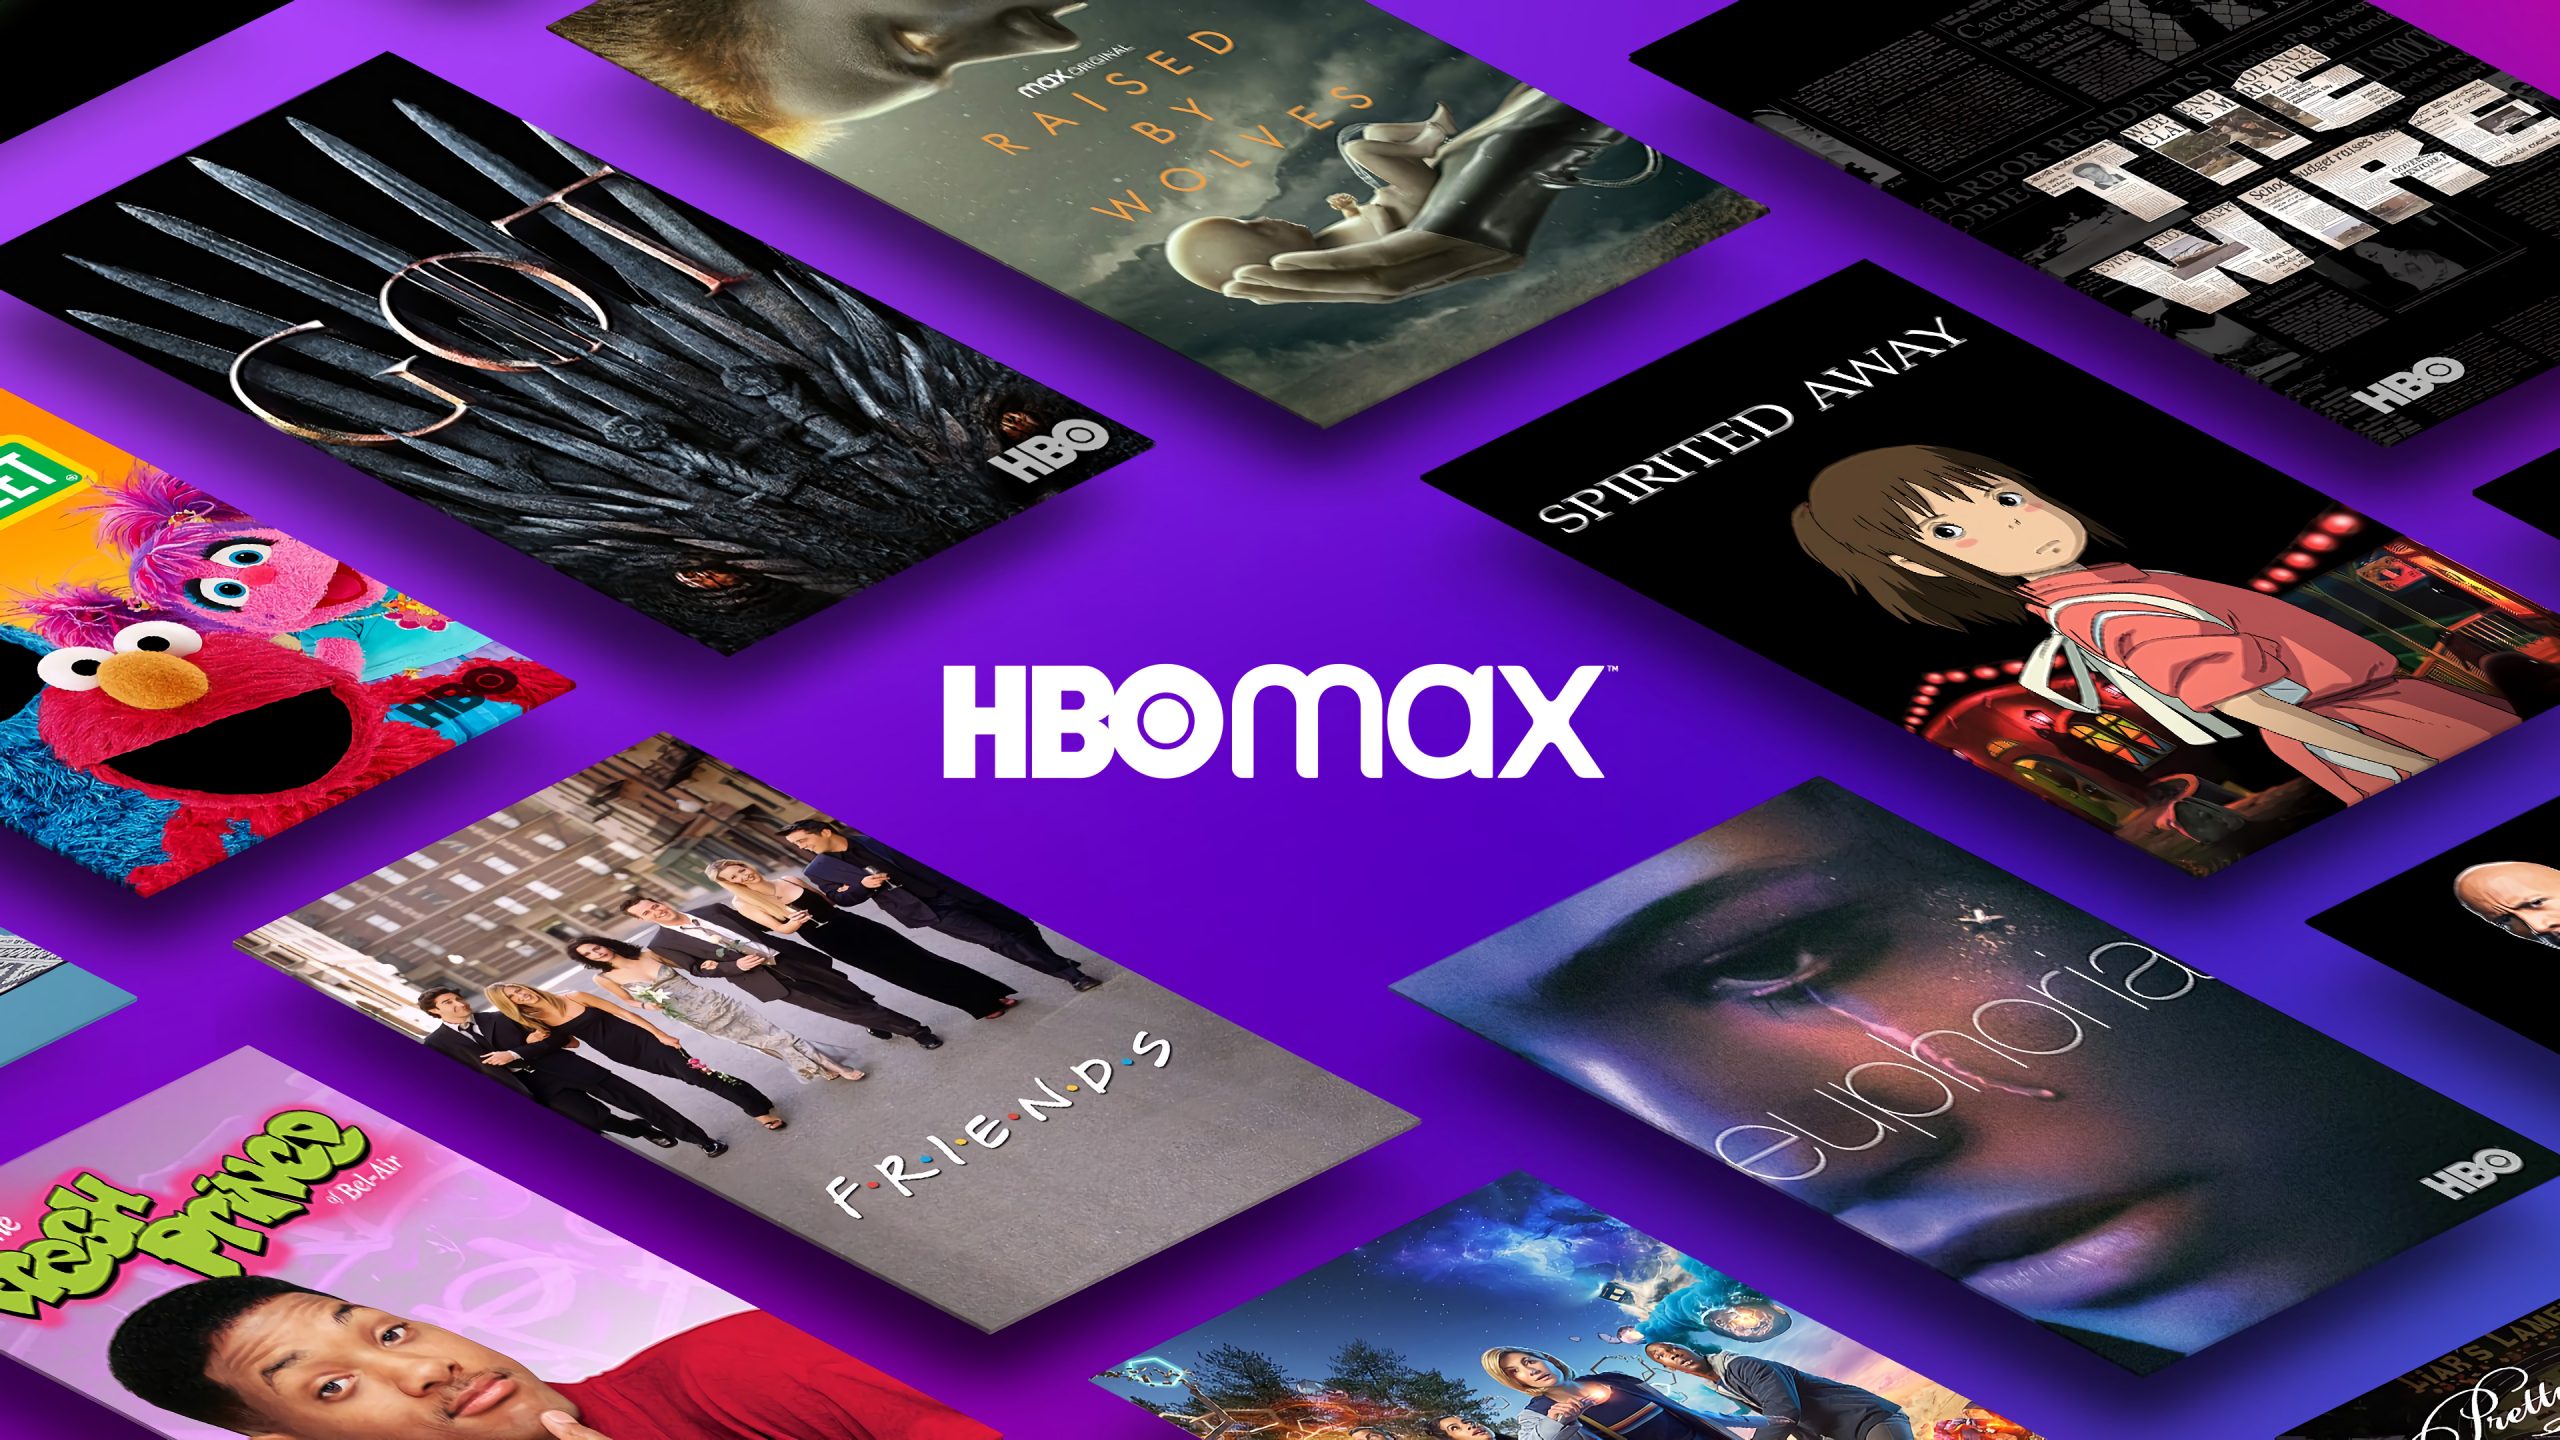 There Are A Few Days Left To Have Hbo Max With Discount